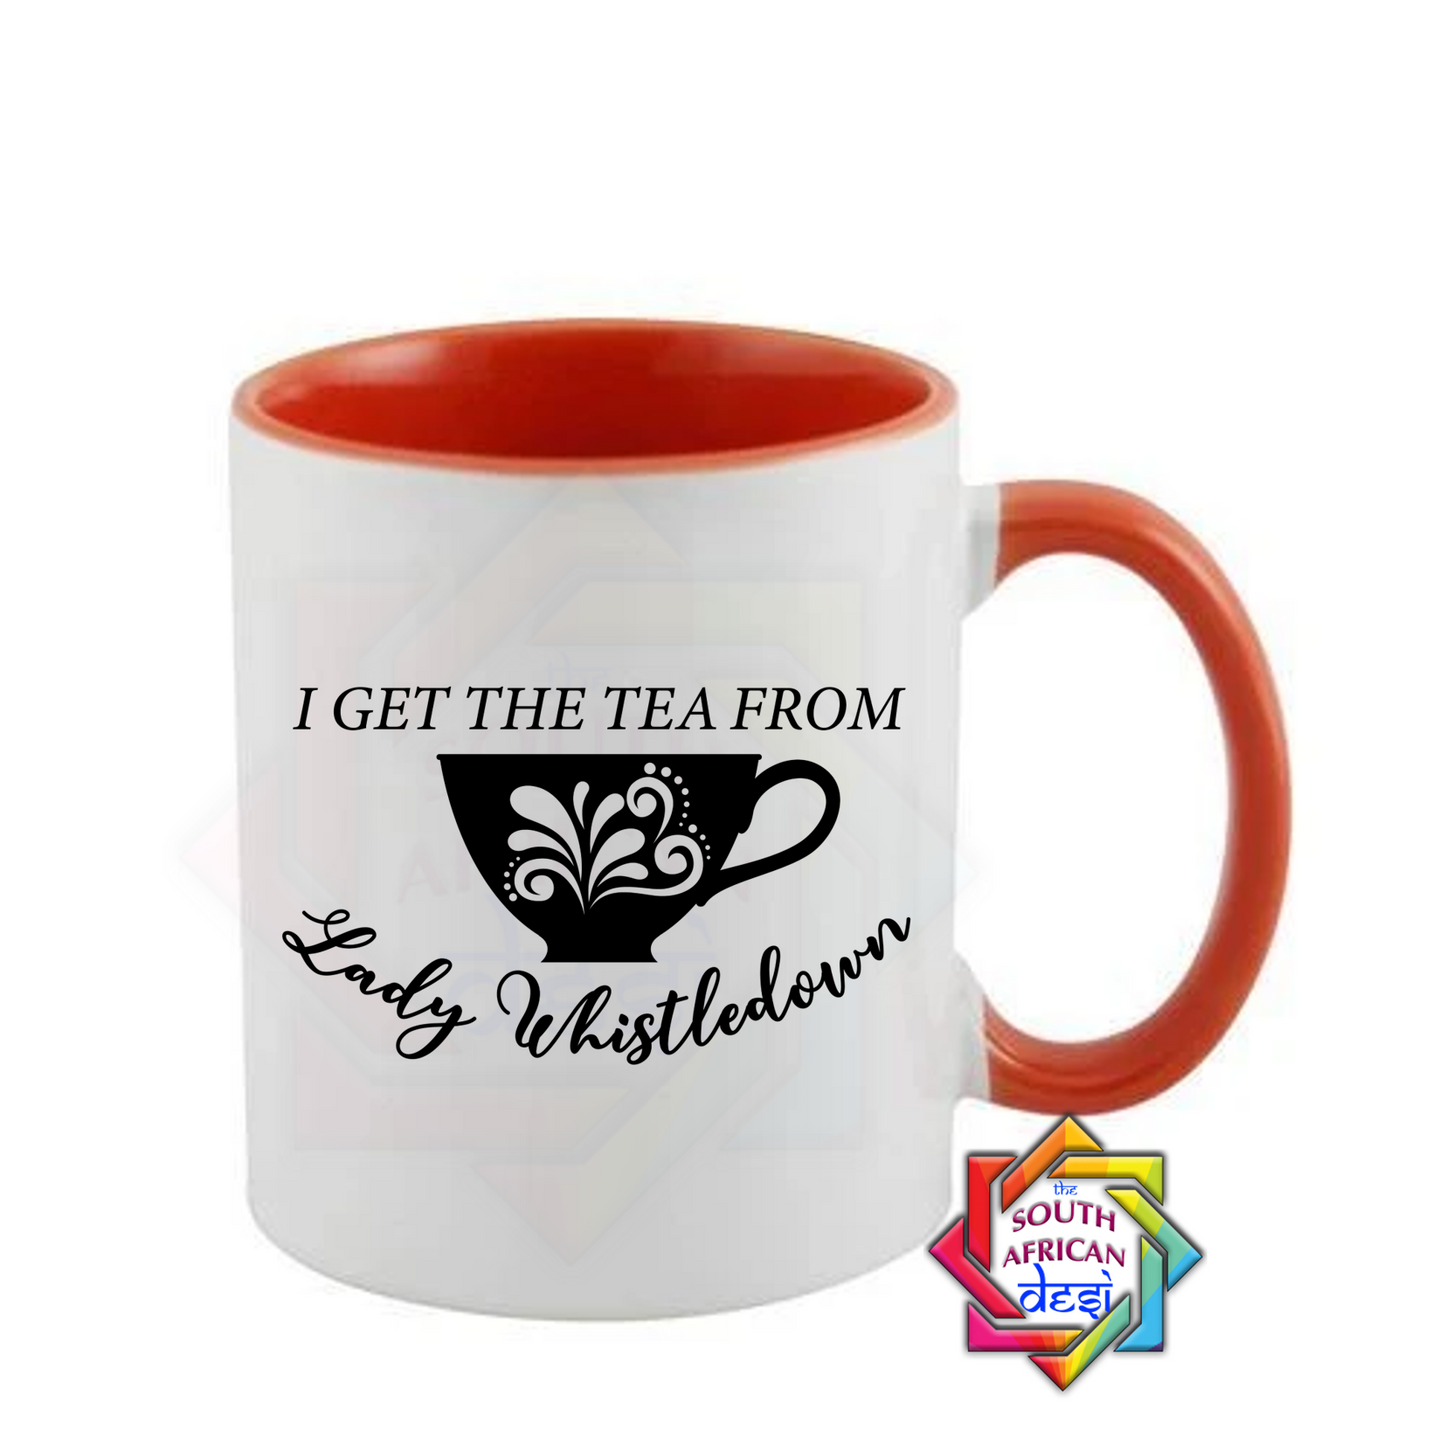 I GET THE TEA FROM LADY WHISTLEDOWN | BRIGERTON INSPIRED MUG